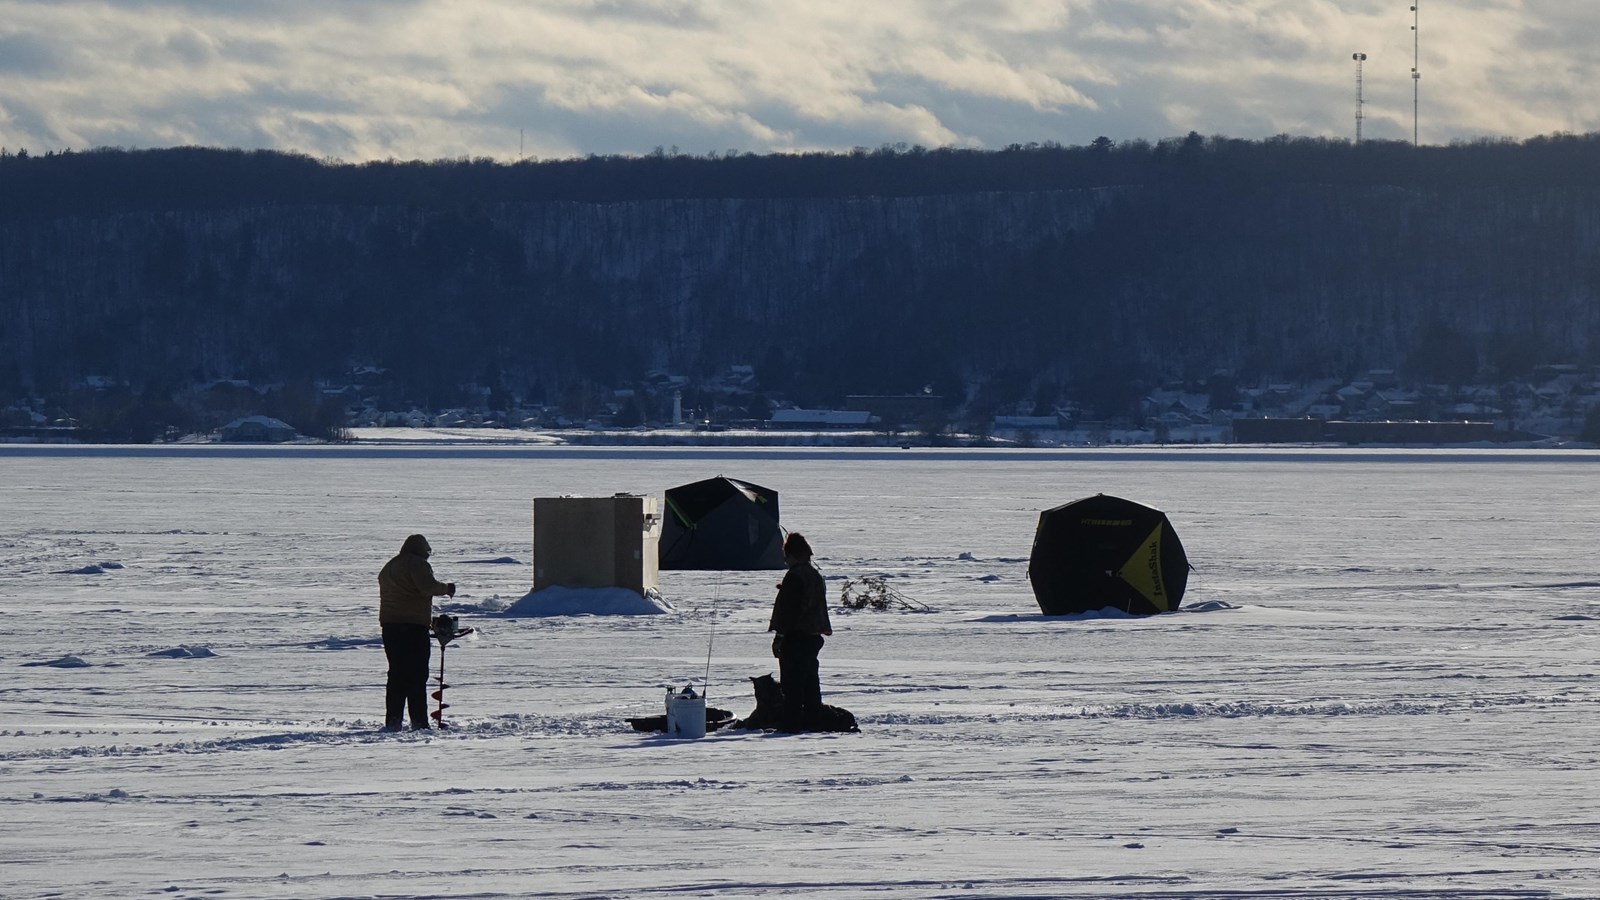 Several ice fishing shanties on Munising Bay with hills in the distance.